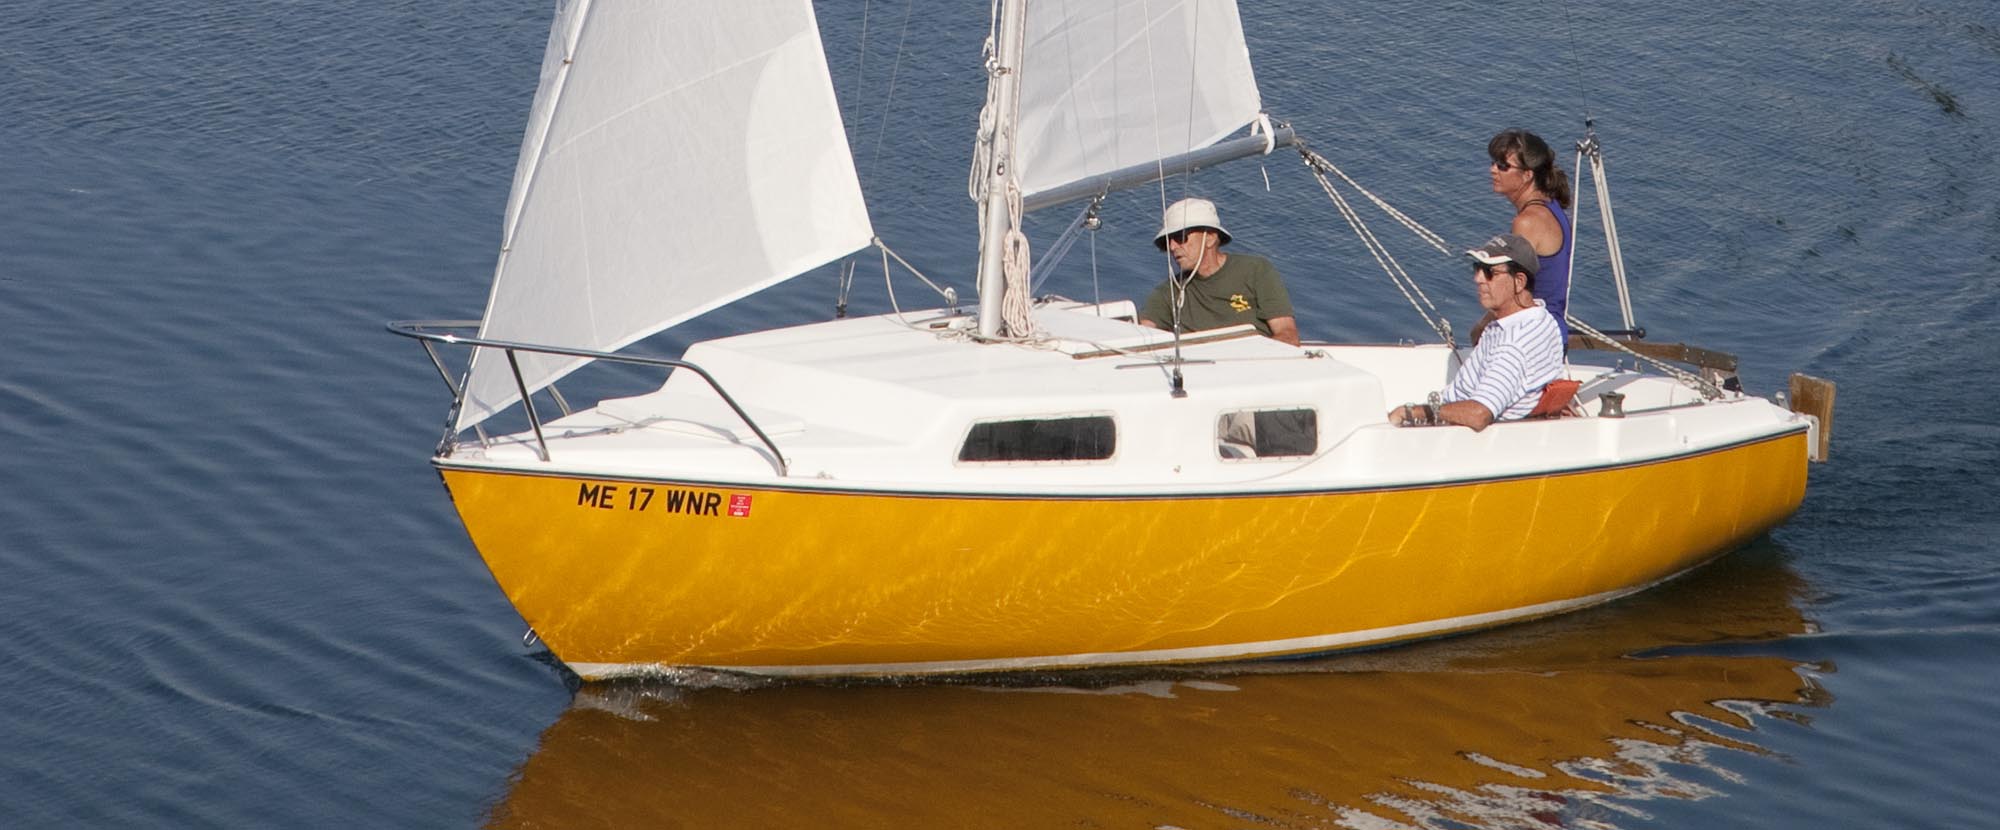 Rent a sailboat from West Harbor Recreation, Inc.